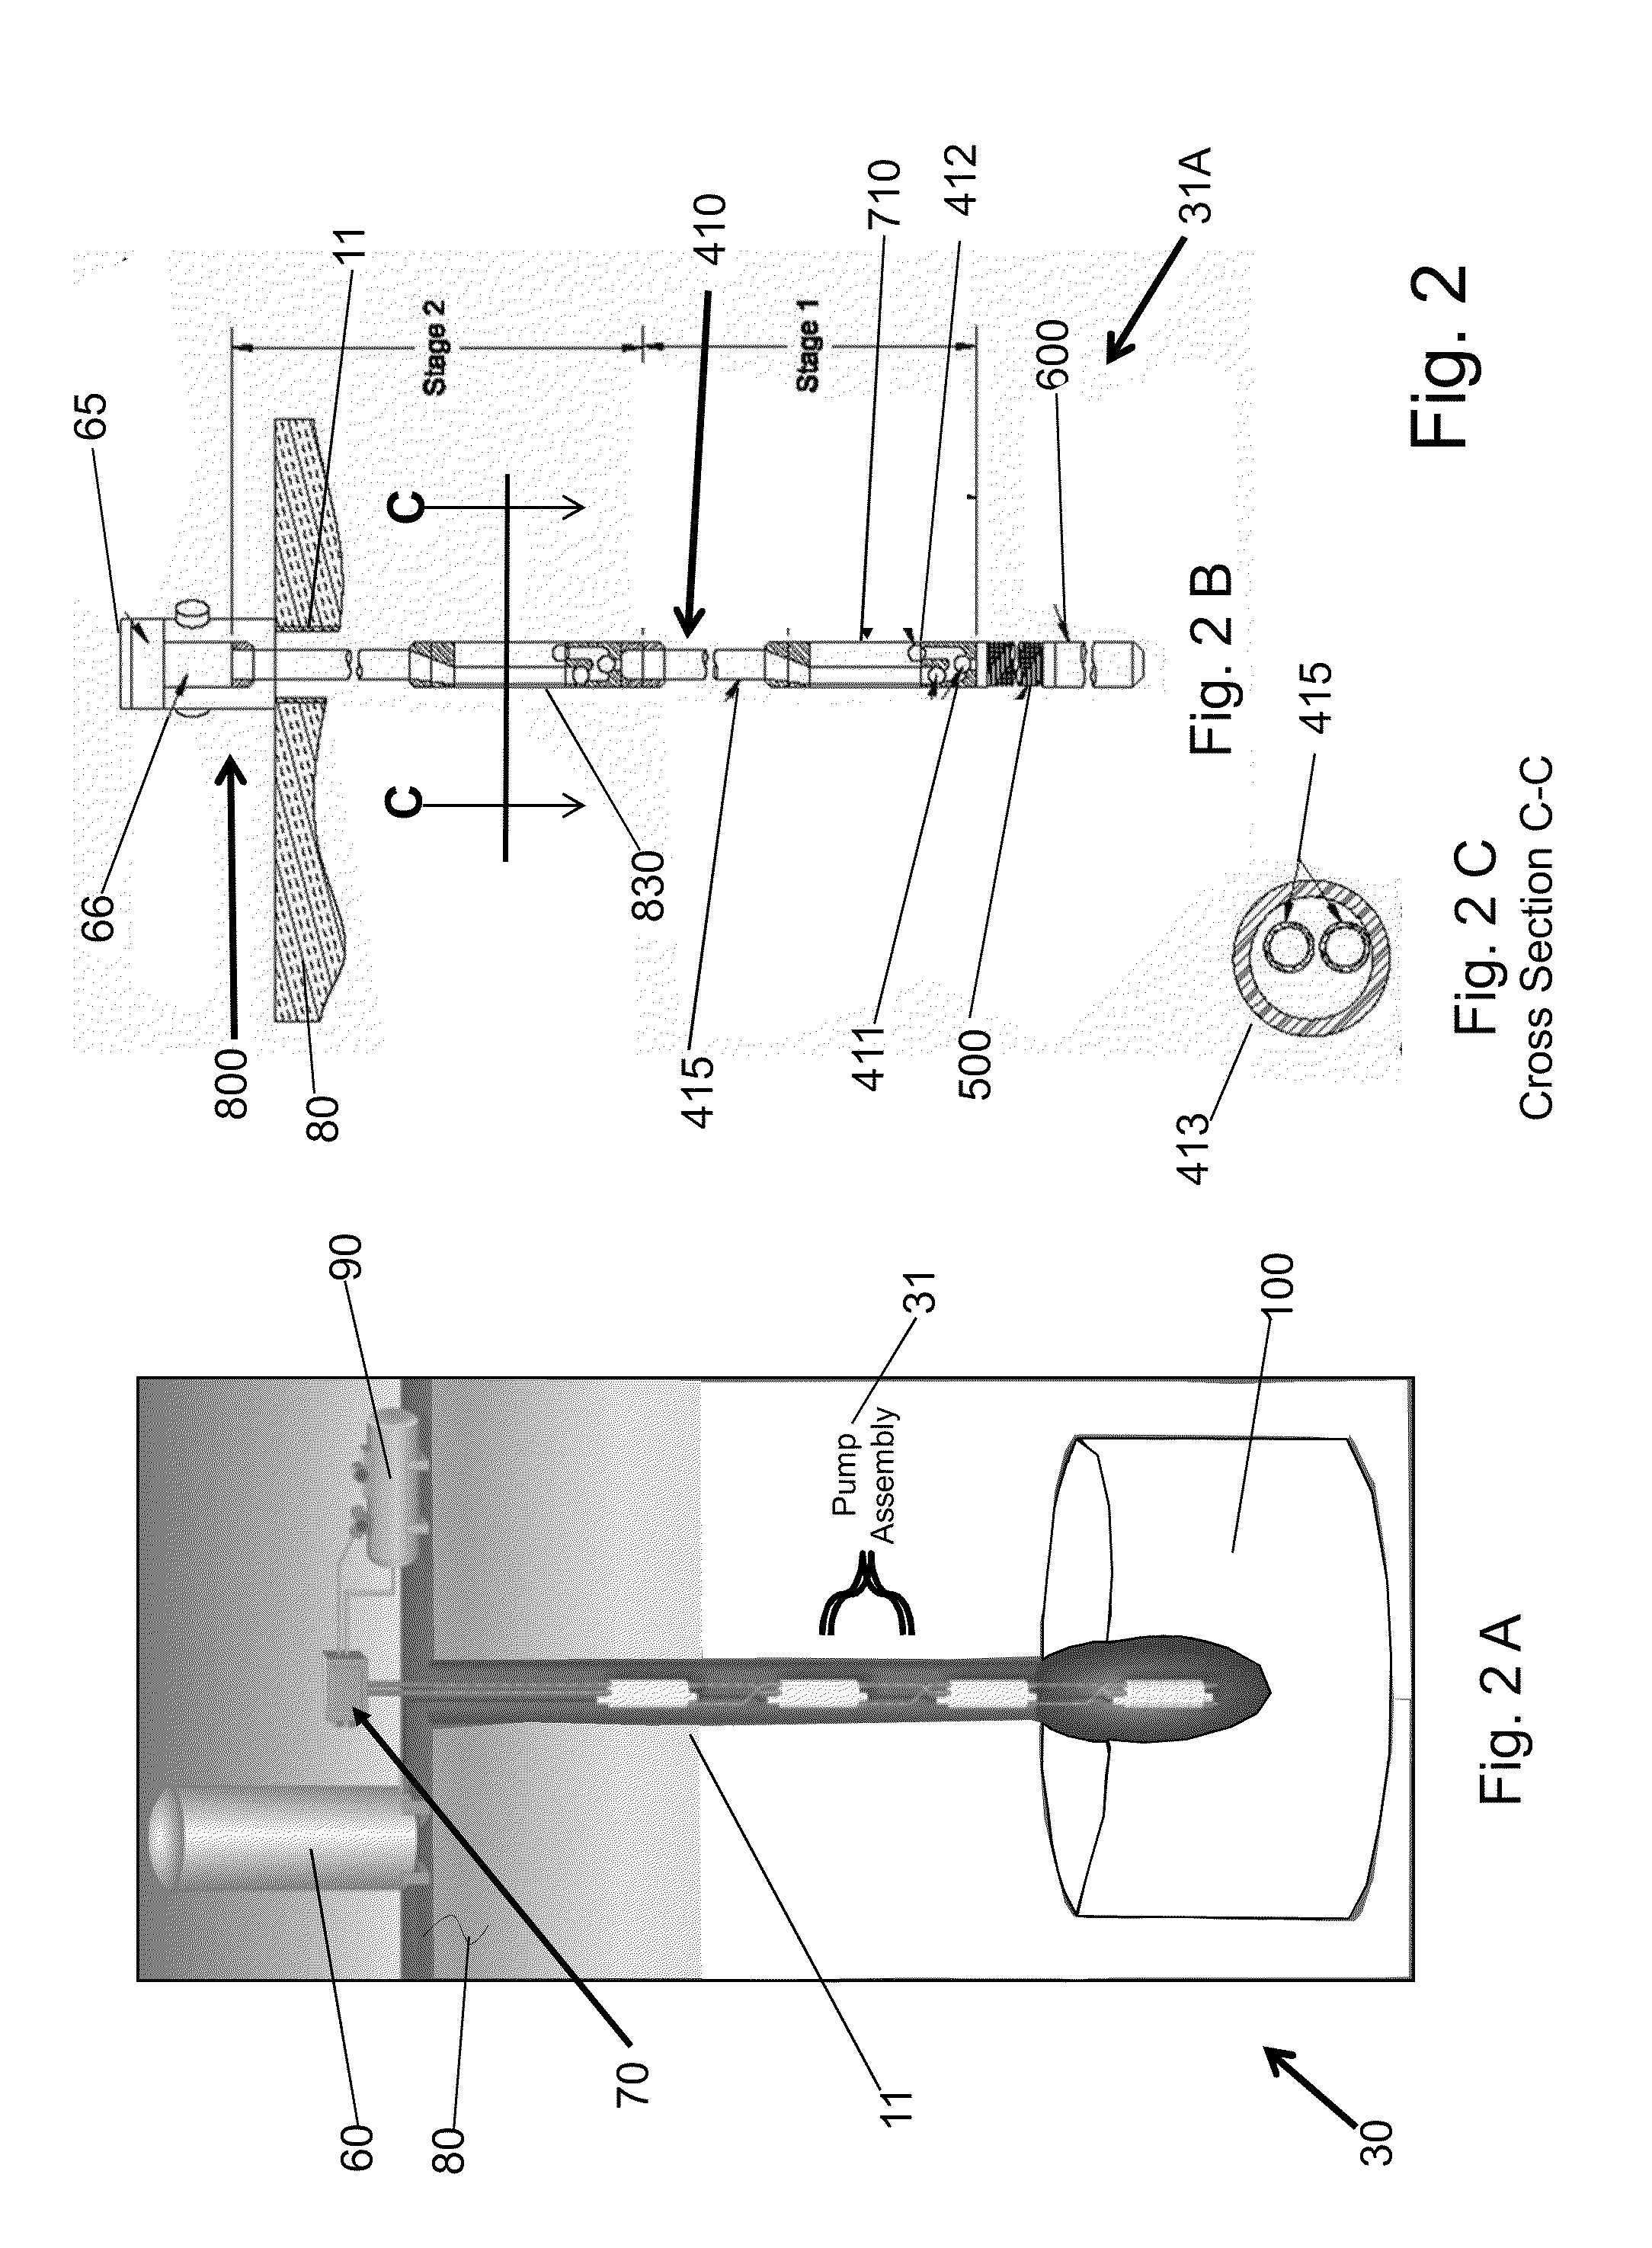 Fluid well pumping system and method to produce same